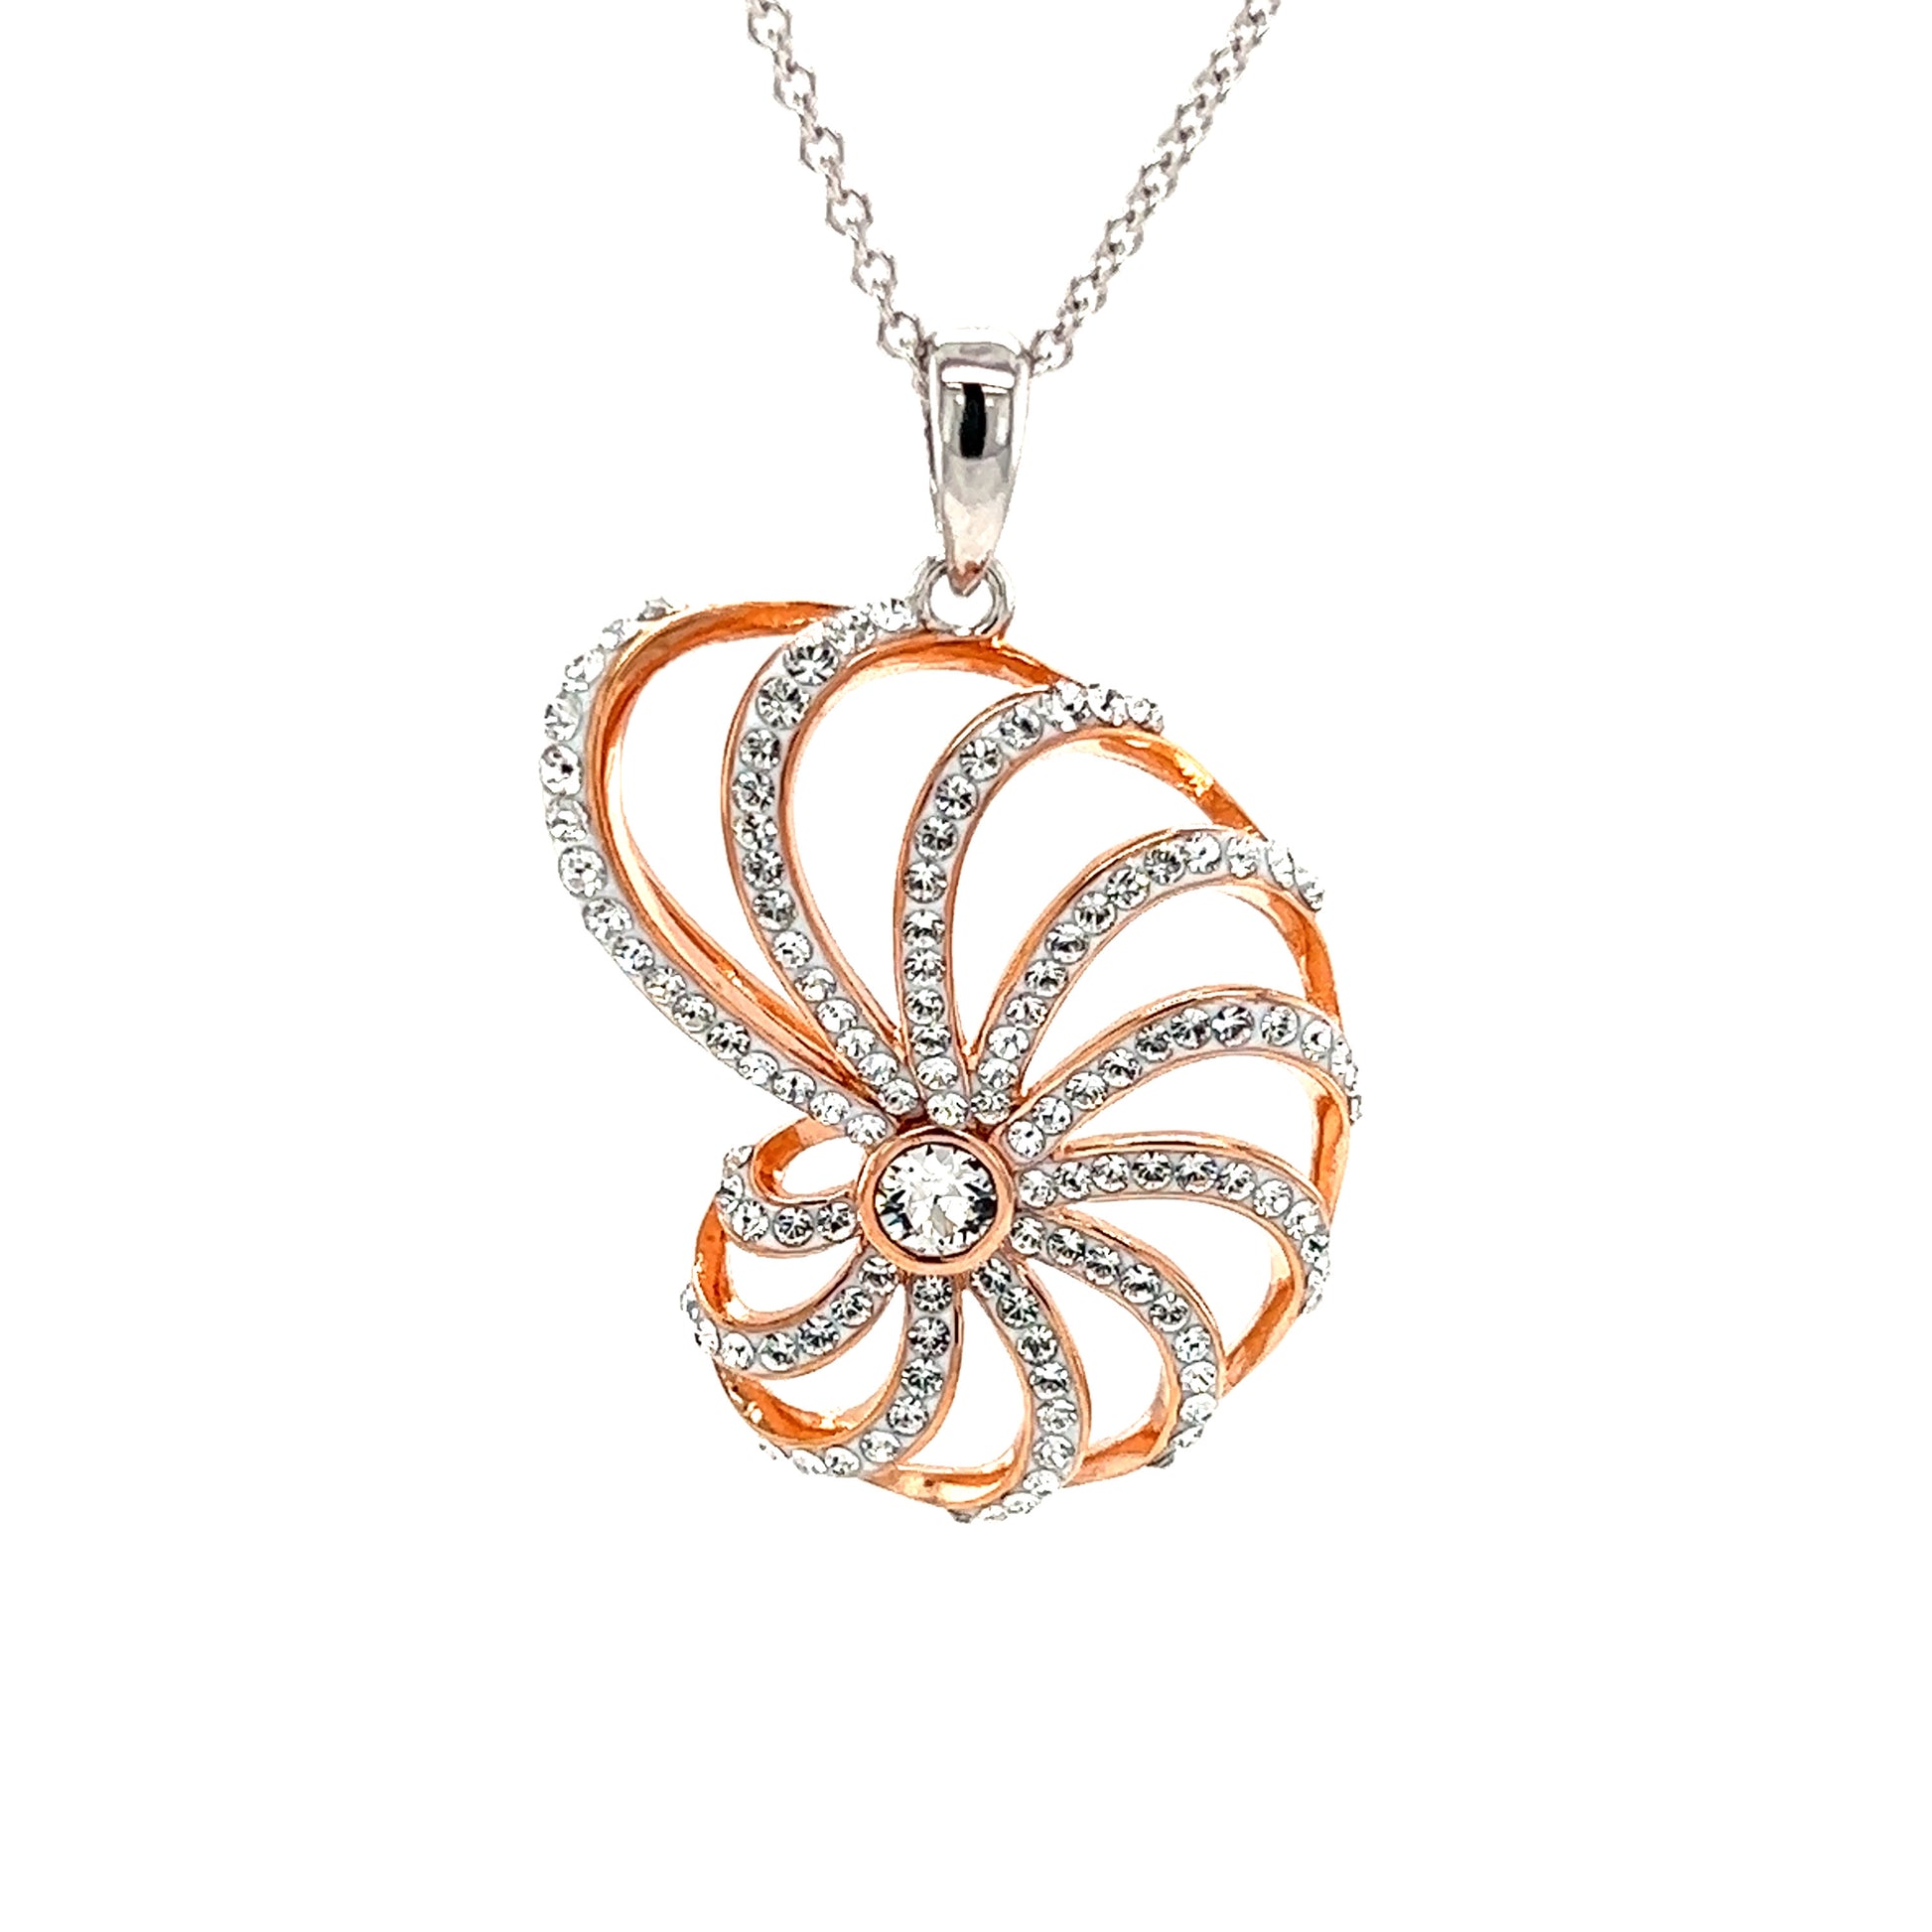 Nautilus Shell Necklace with Rose Gold Plate and White Crystals in Sterling Silver Pendant View